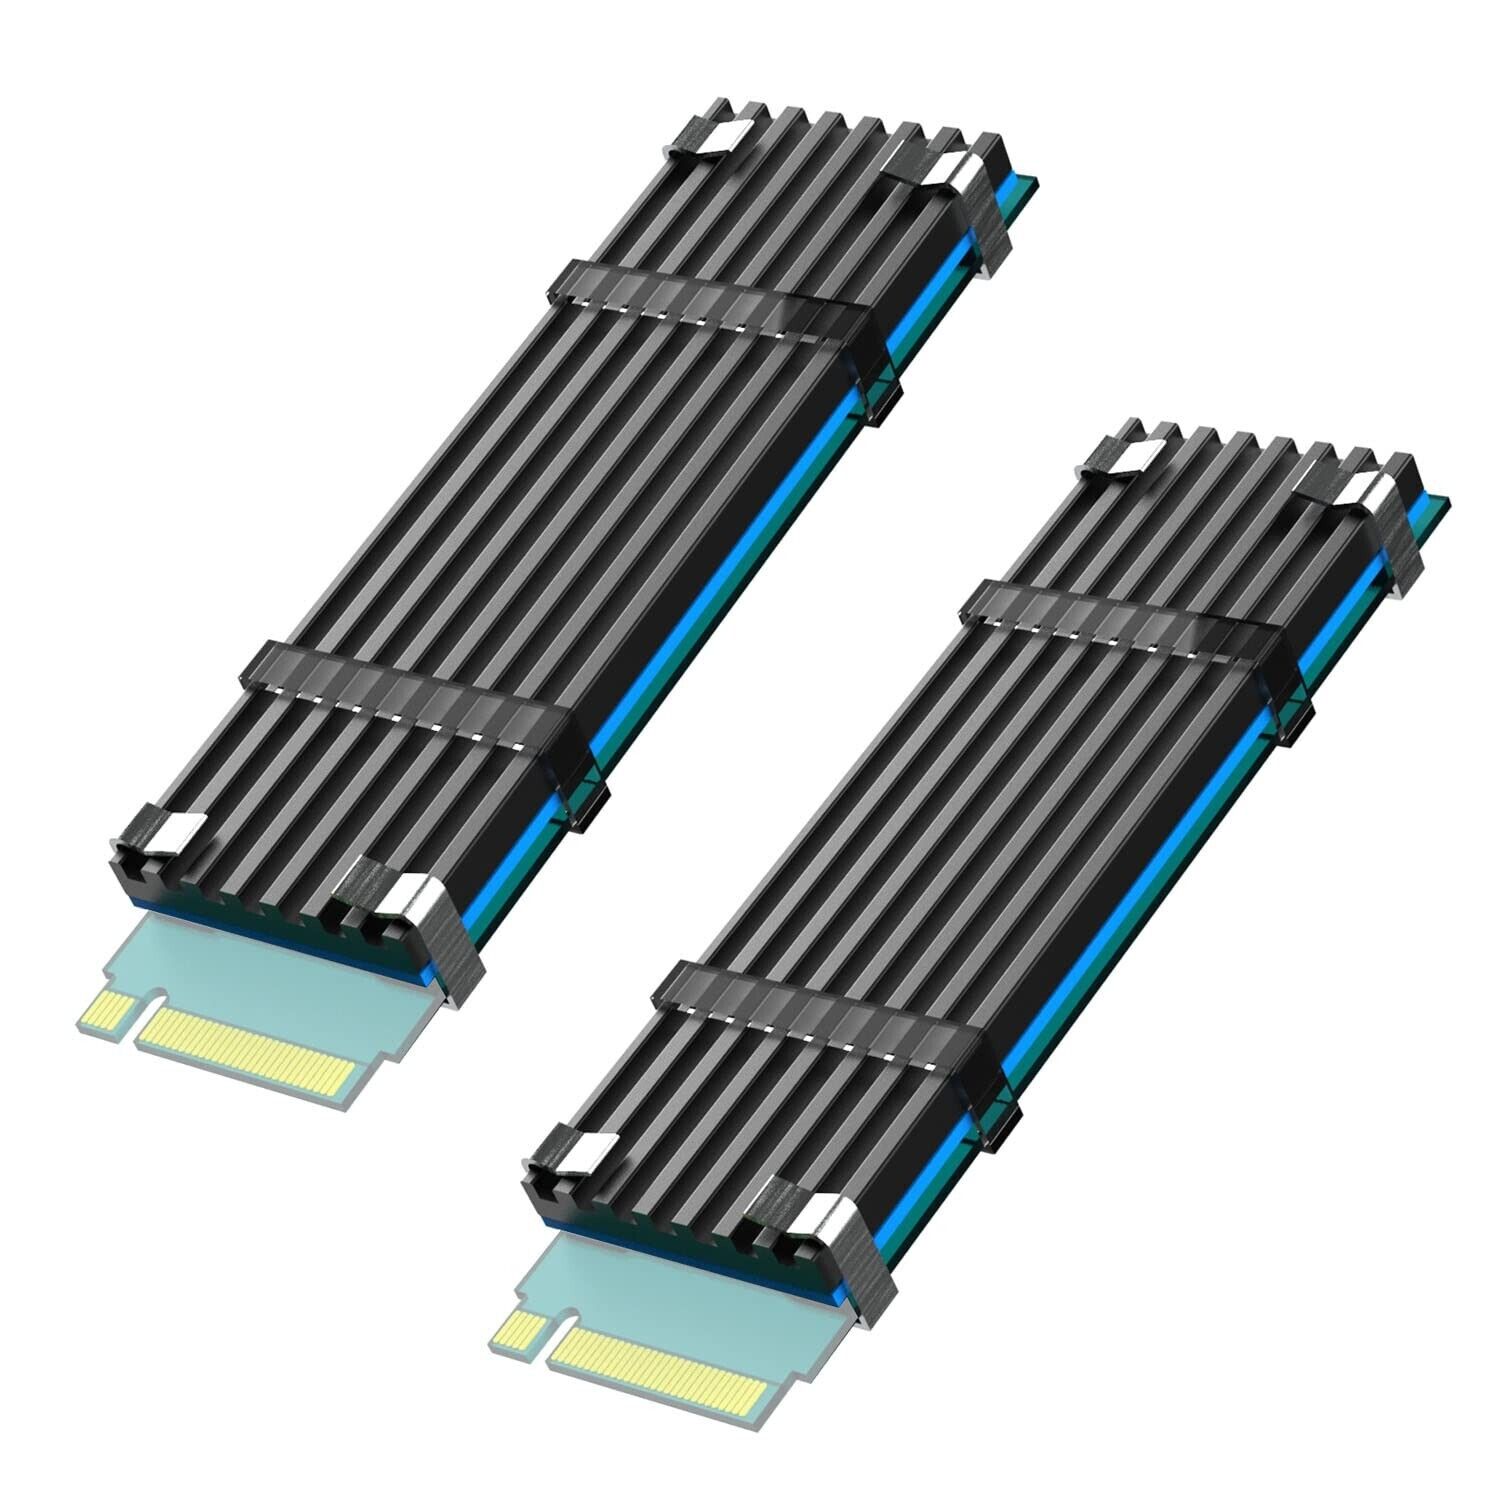 GLOTRENDS M.2 Heatsink with M.2 Thermal Pad for 2280 M.2 PCIe 4.0/3.0 NVMe SSD